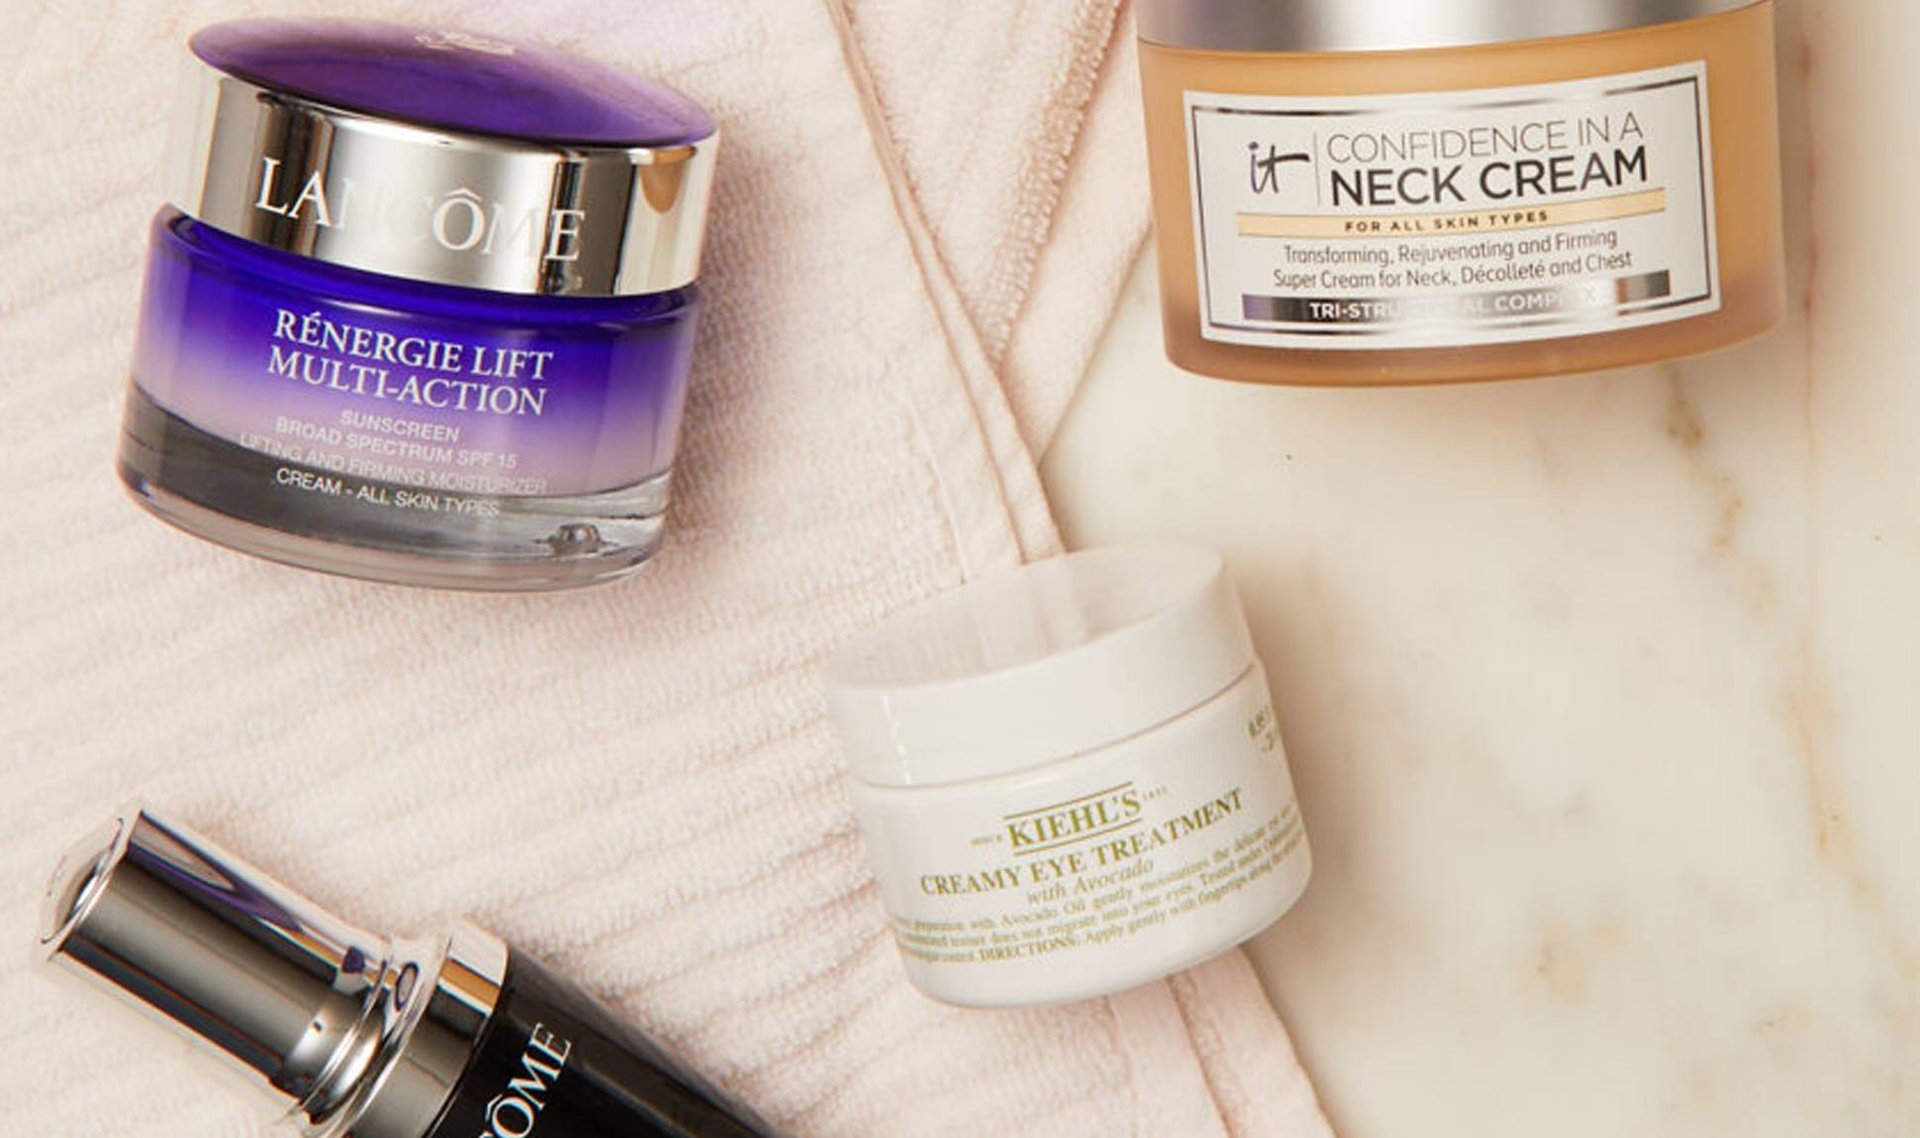 Shopping Luxury Beauty Brands Has Never Been Easier Thanks to Macy’s Virtual Holiday Shop